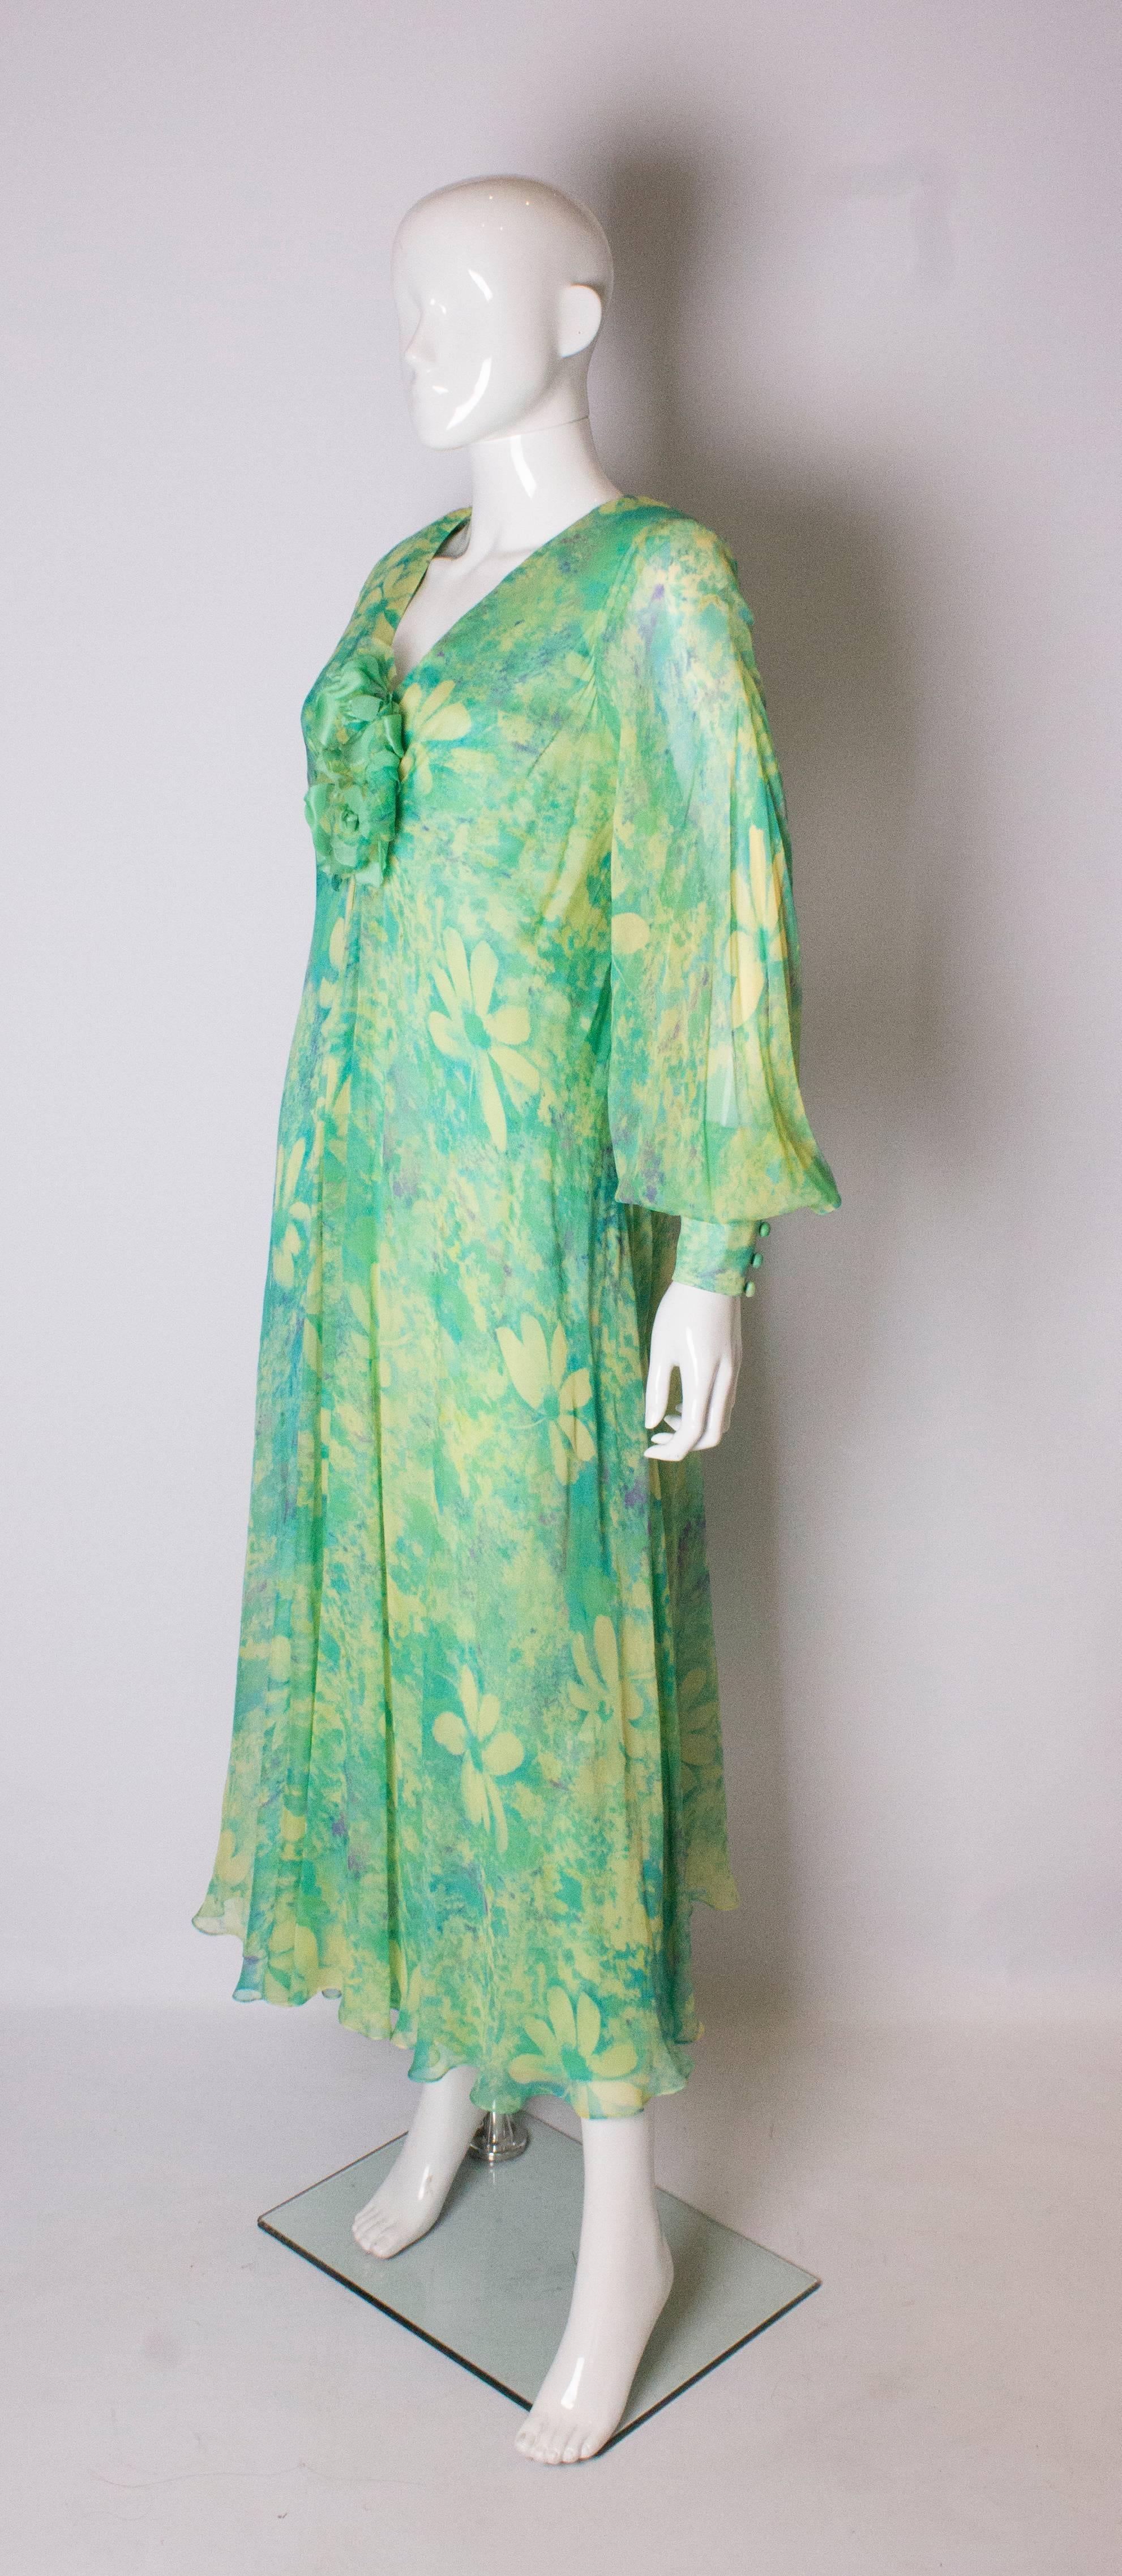 A pretty and easy to wear vintage dress by Alison Rodger. The dress has a silk chiffon over dress in a yellow, green and blue floral print It has a silk underdress t and is lined in silk. It as a central back zip with a pleat on either side, and